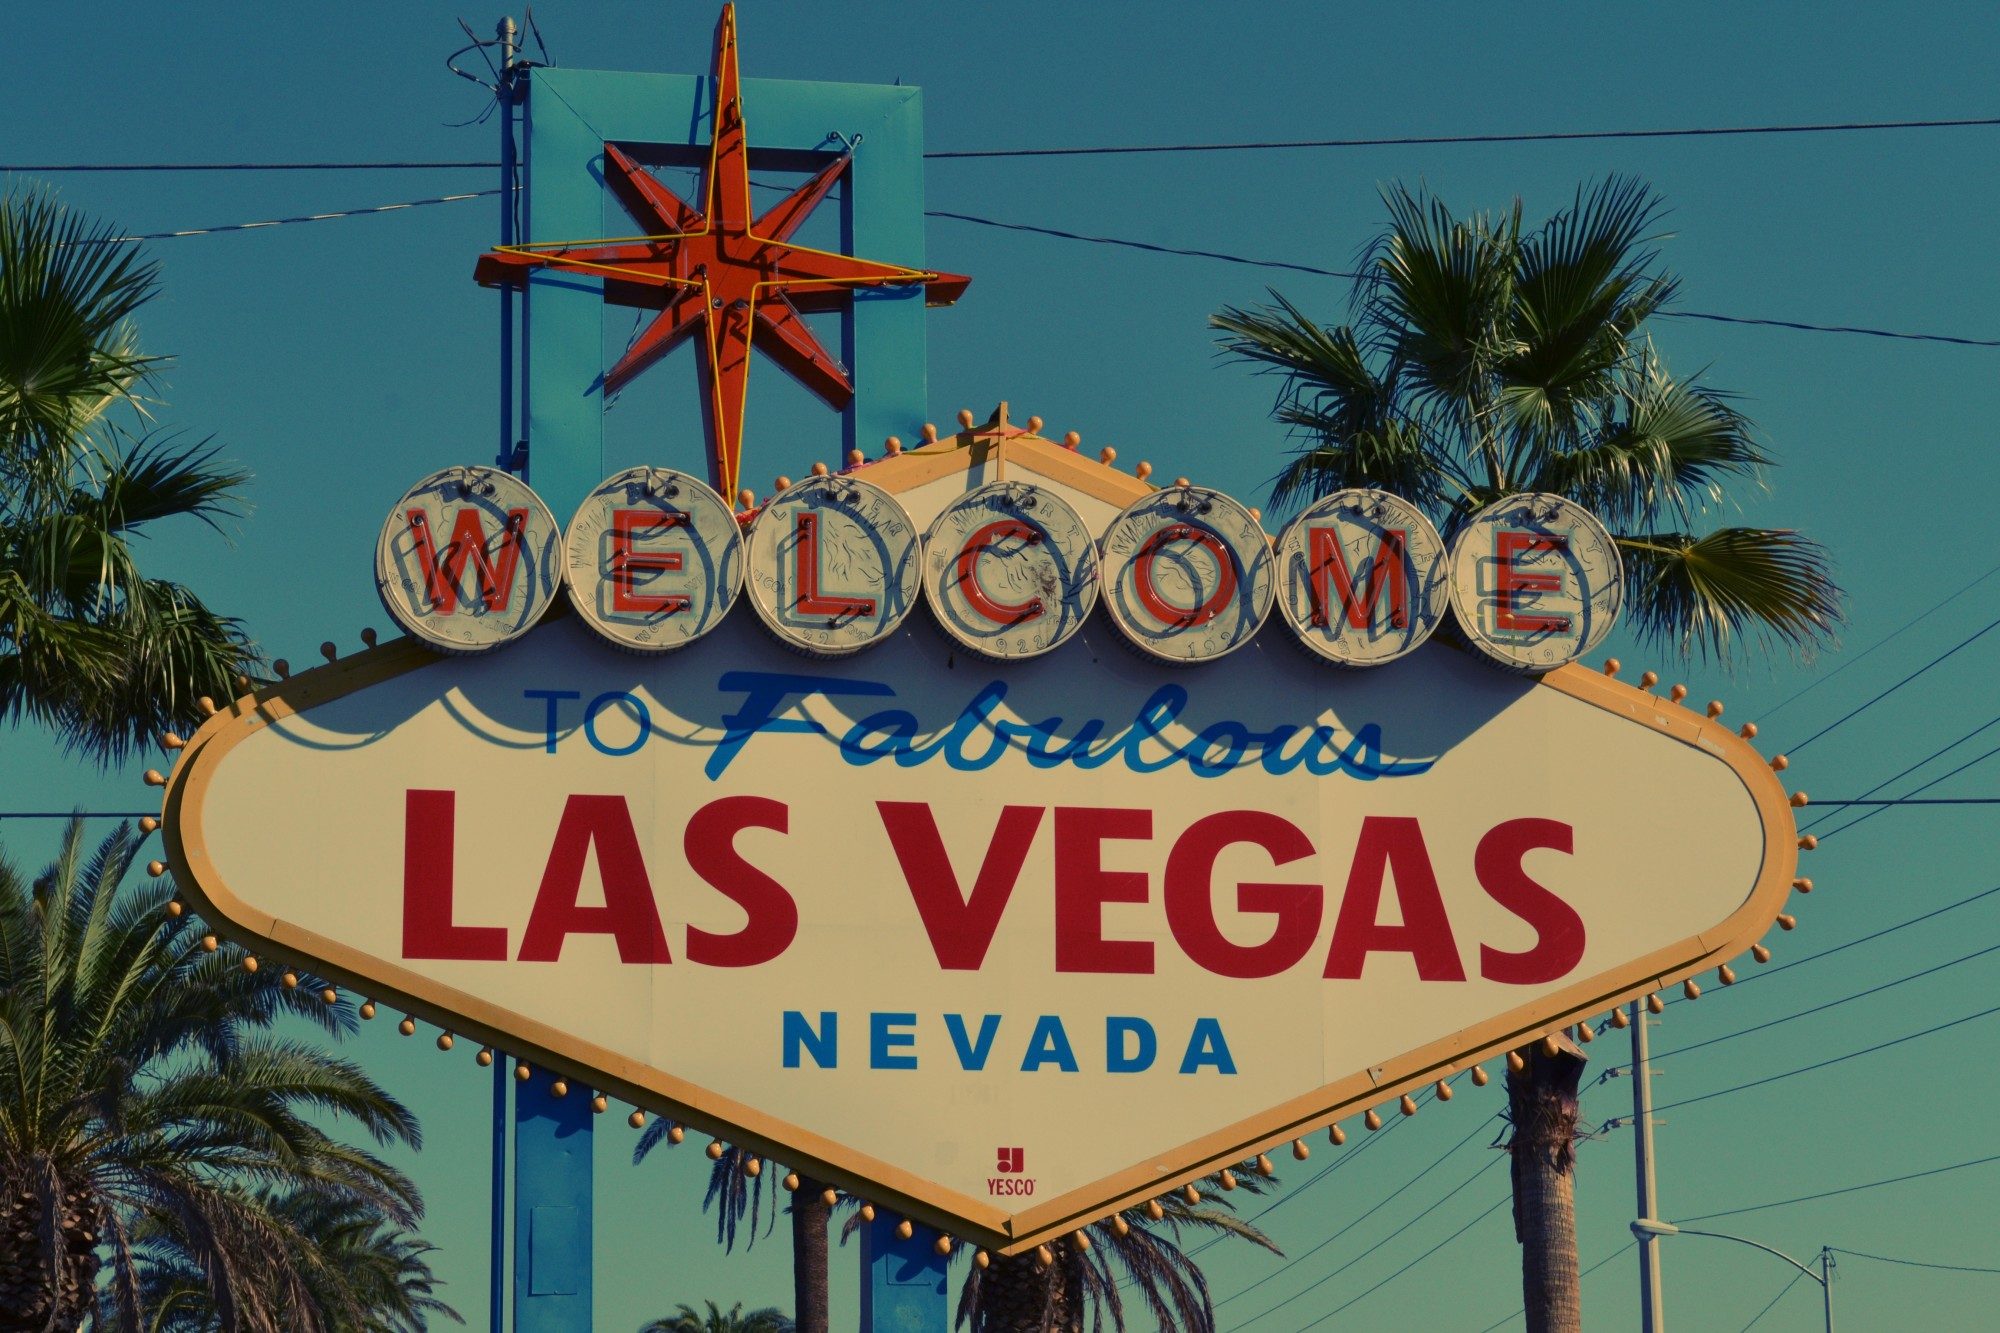 The Complete Guide to Moving From San Diego to Las Vegas